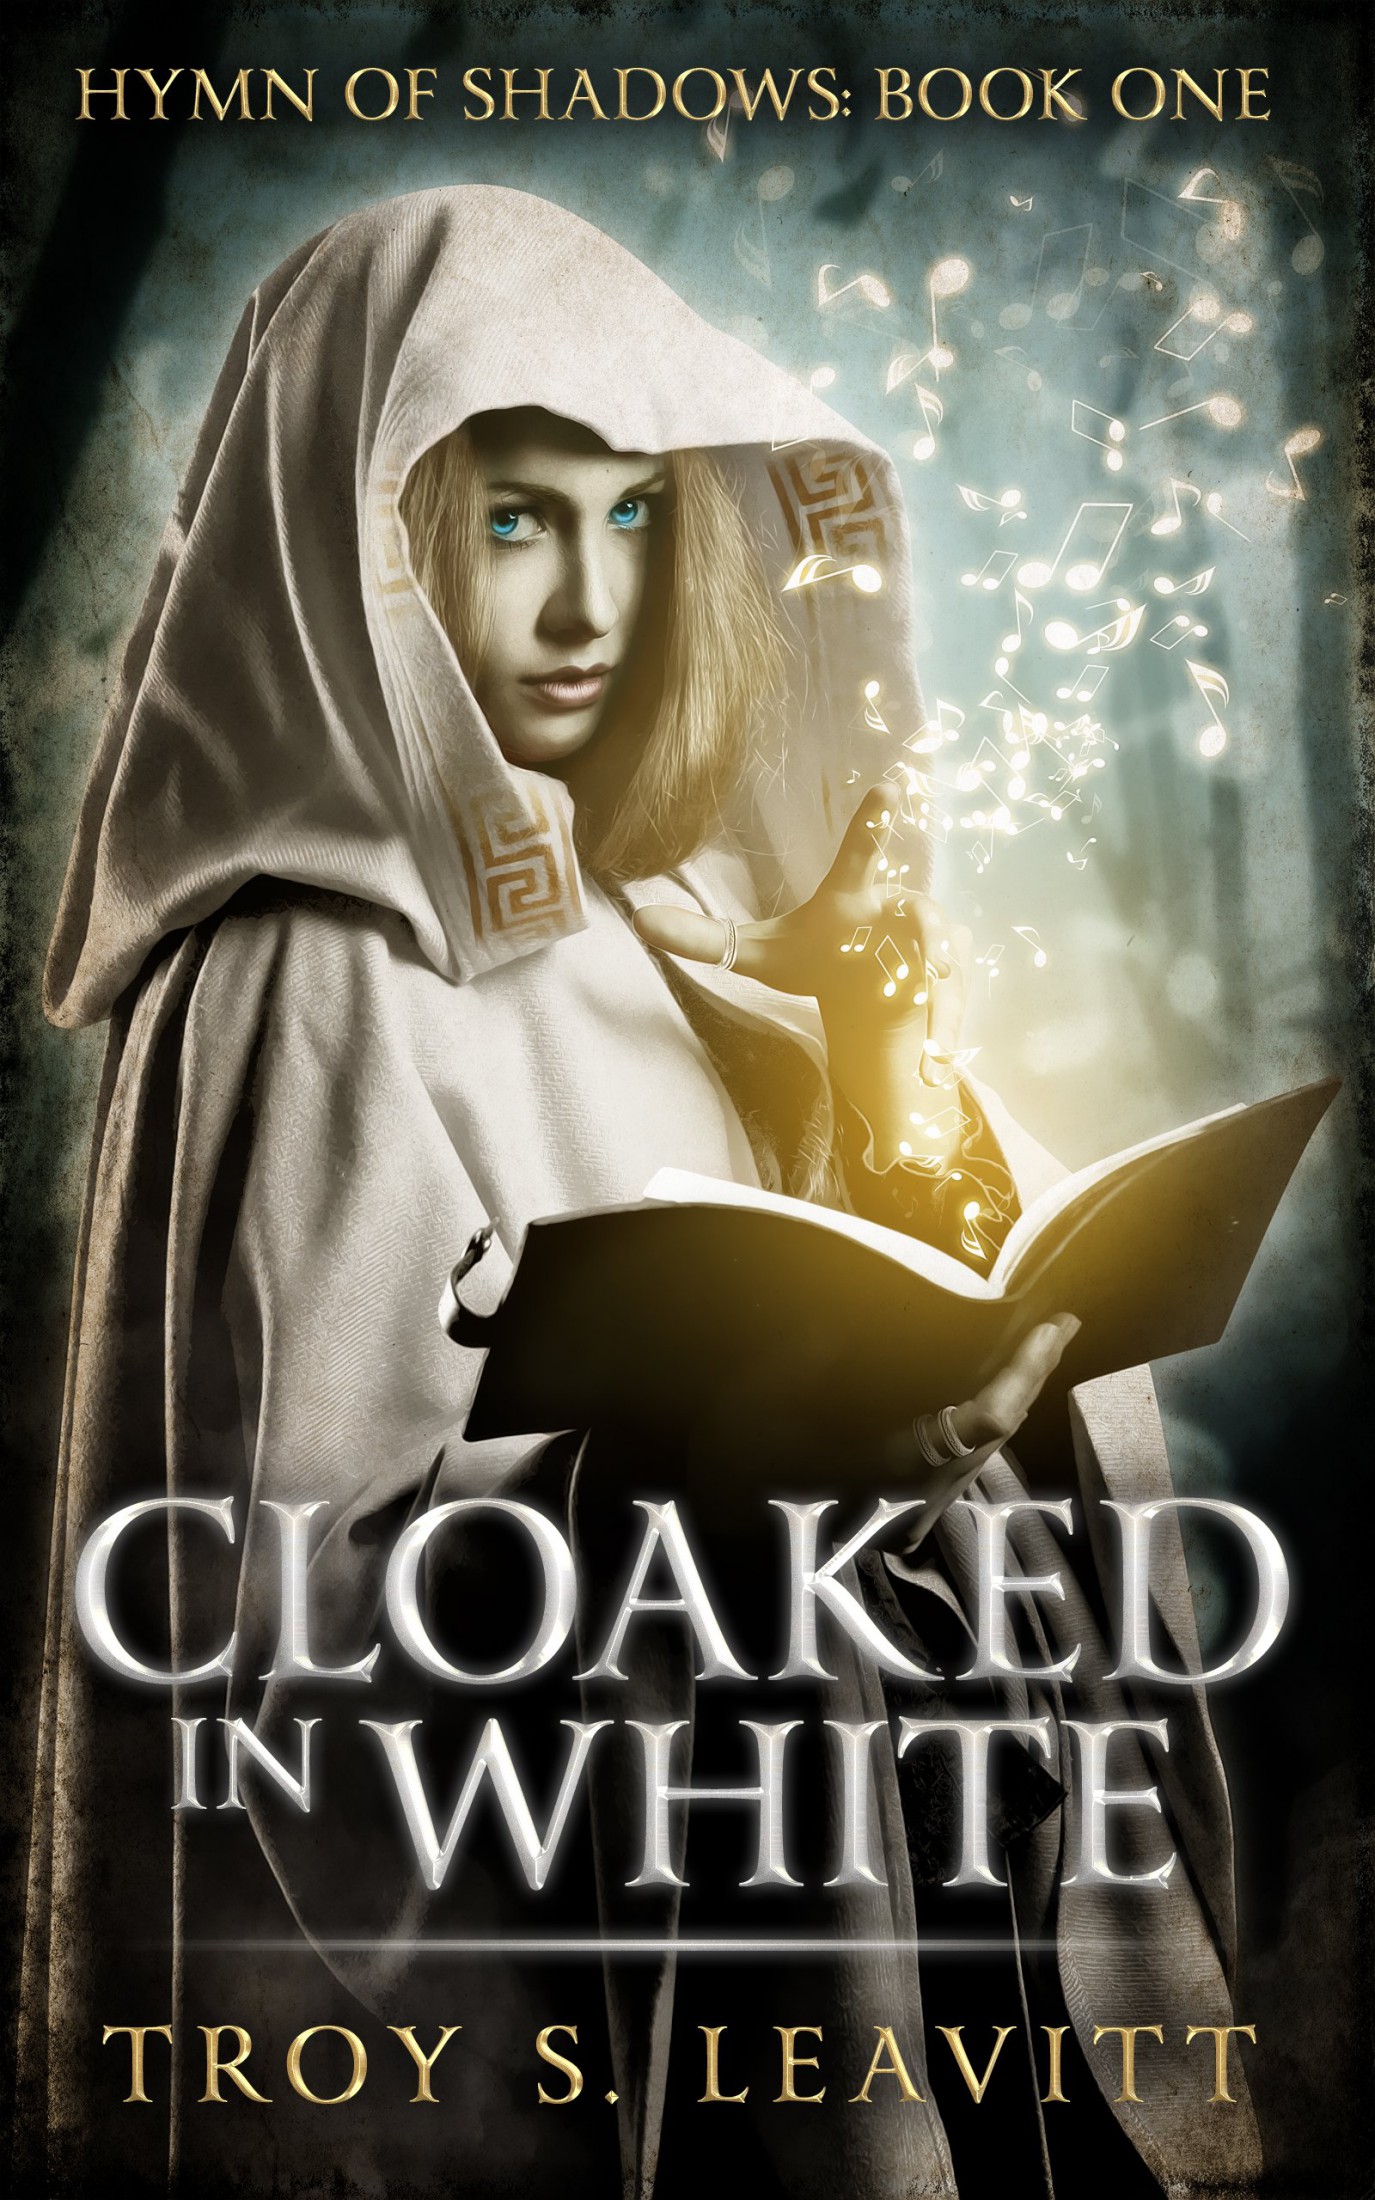 Cloaked in White (Hymn of Shadows Book 1)